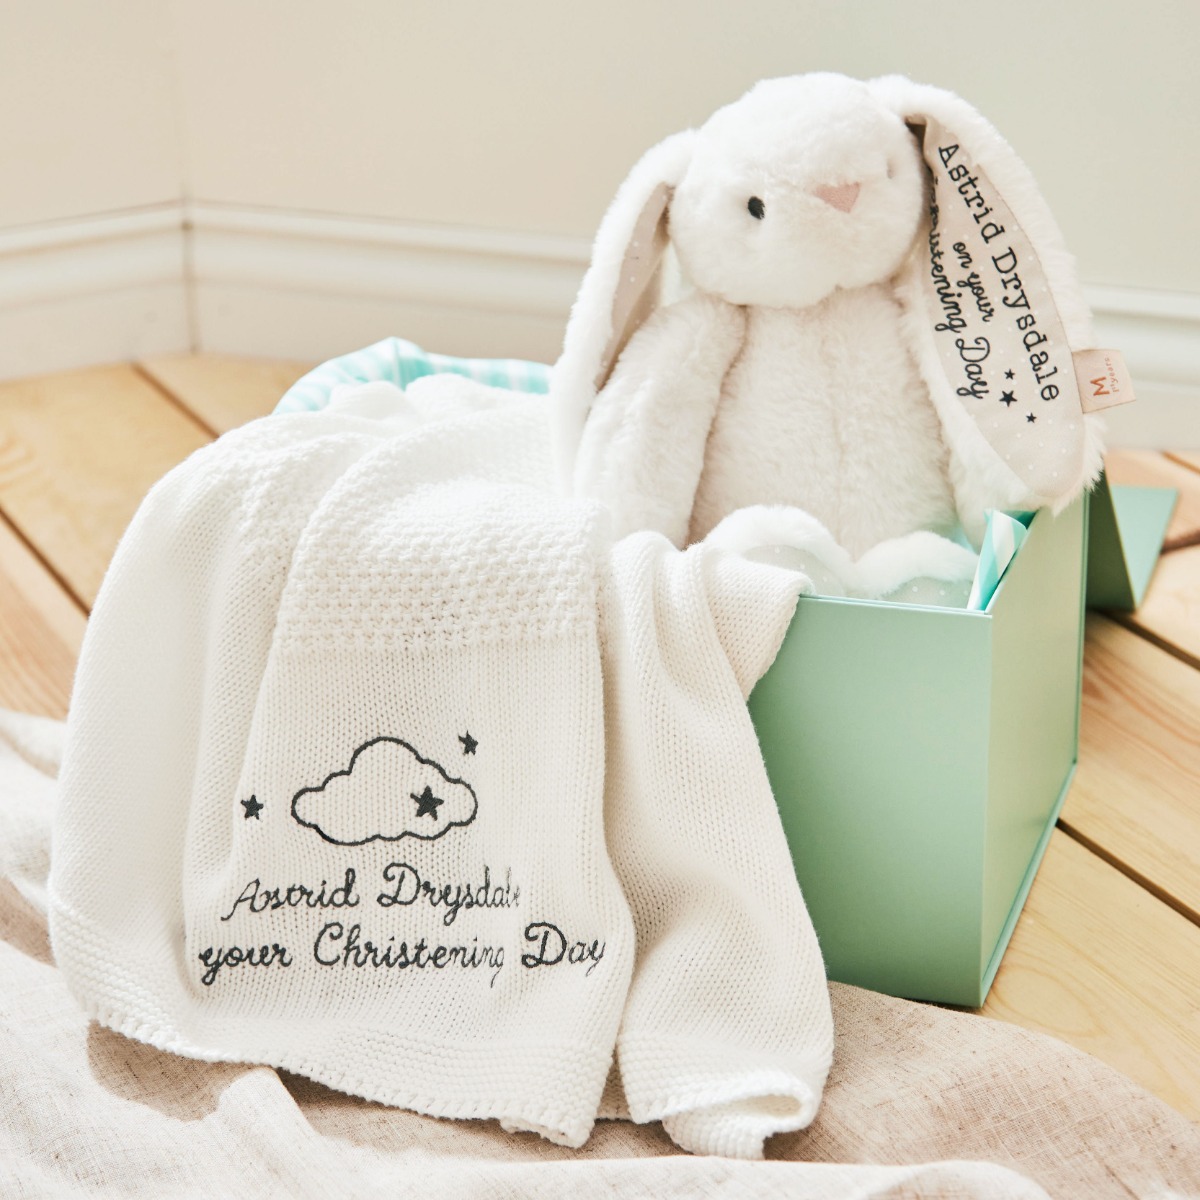 Personalised White Bunny and Blanket Christening Gift Set